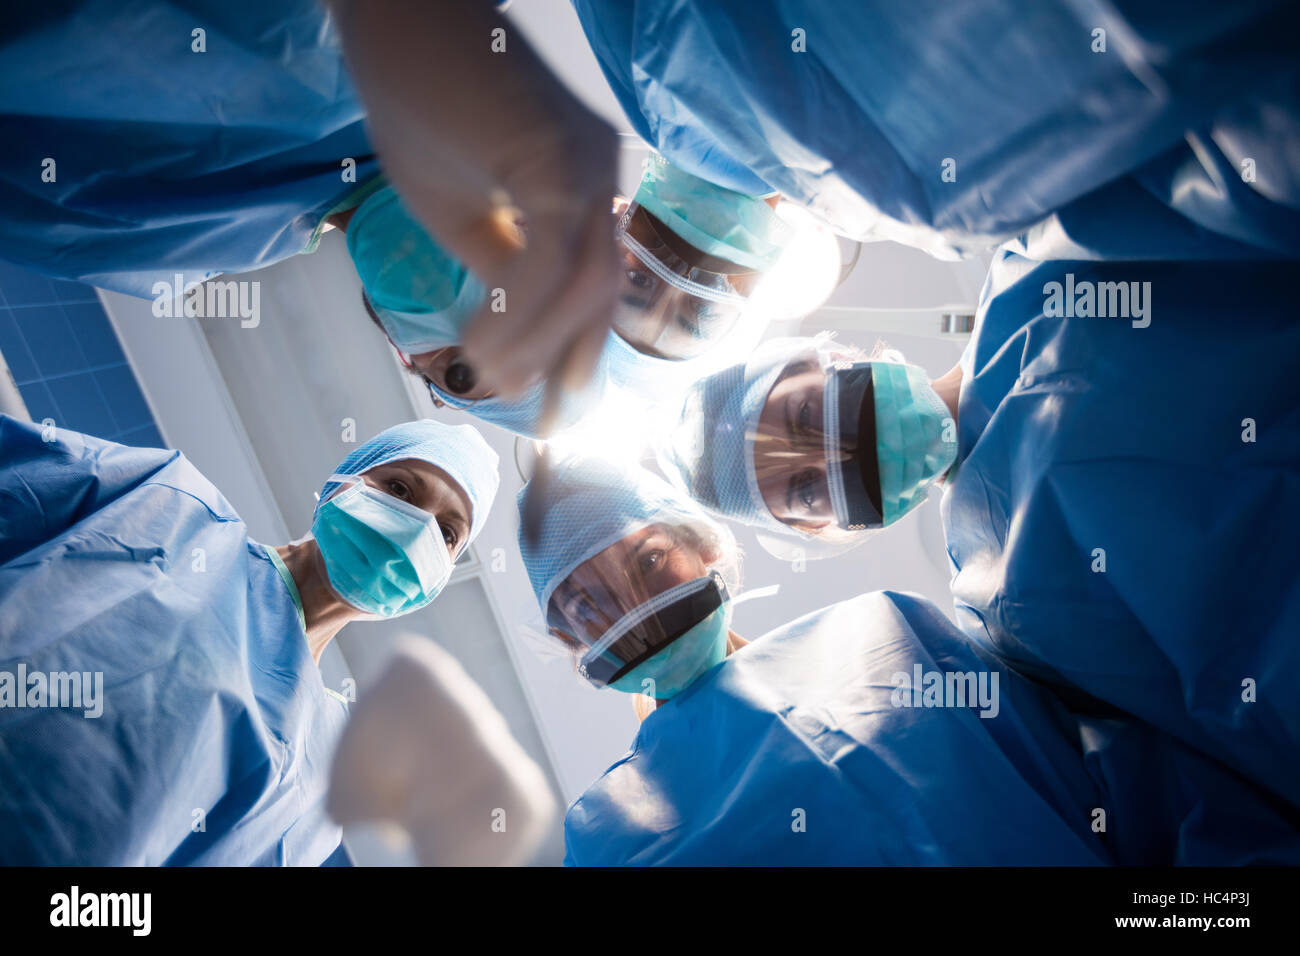 Group of surgeons looking at camera in operation room Stock Photo